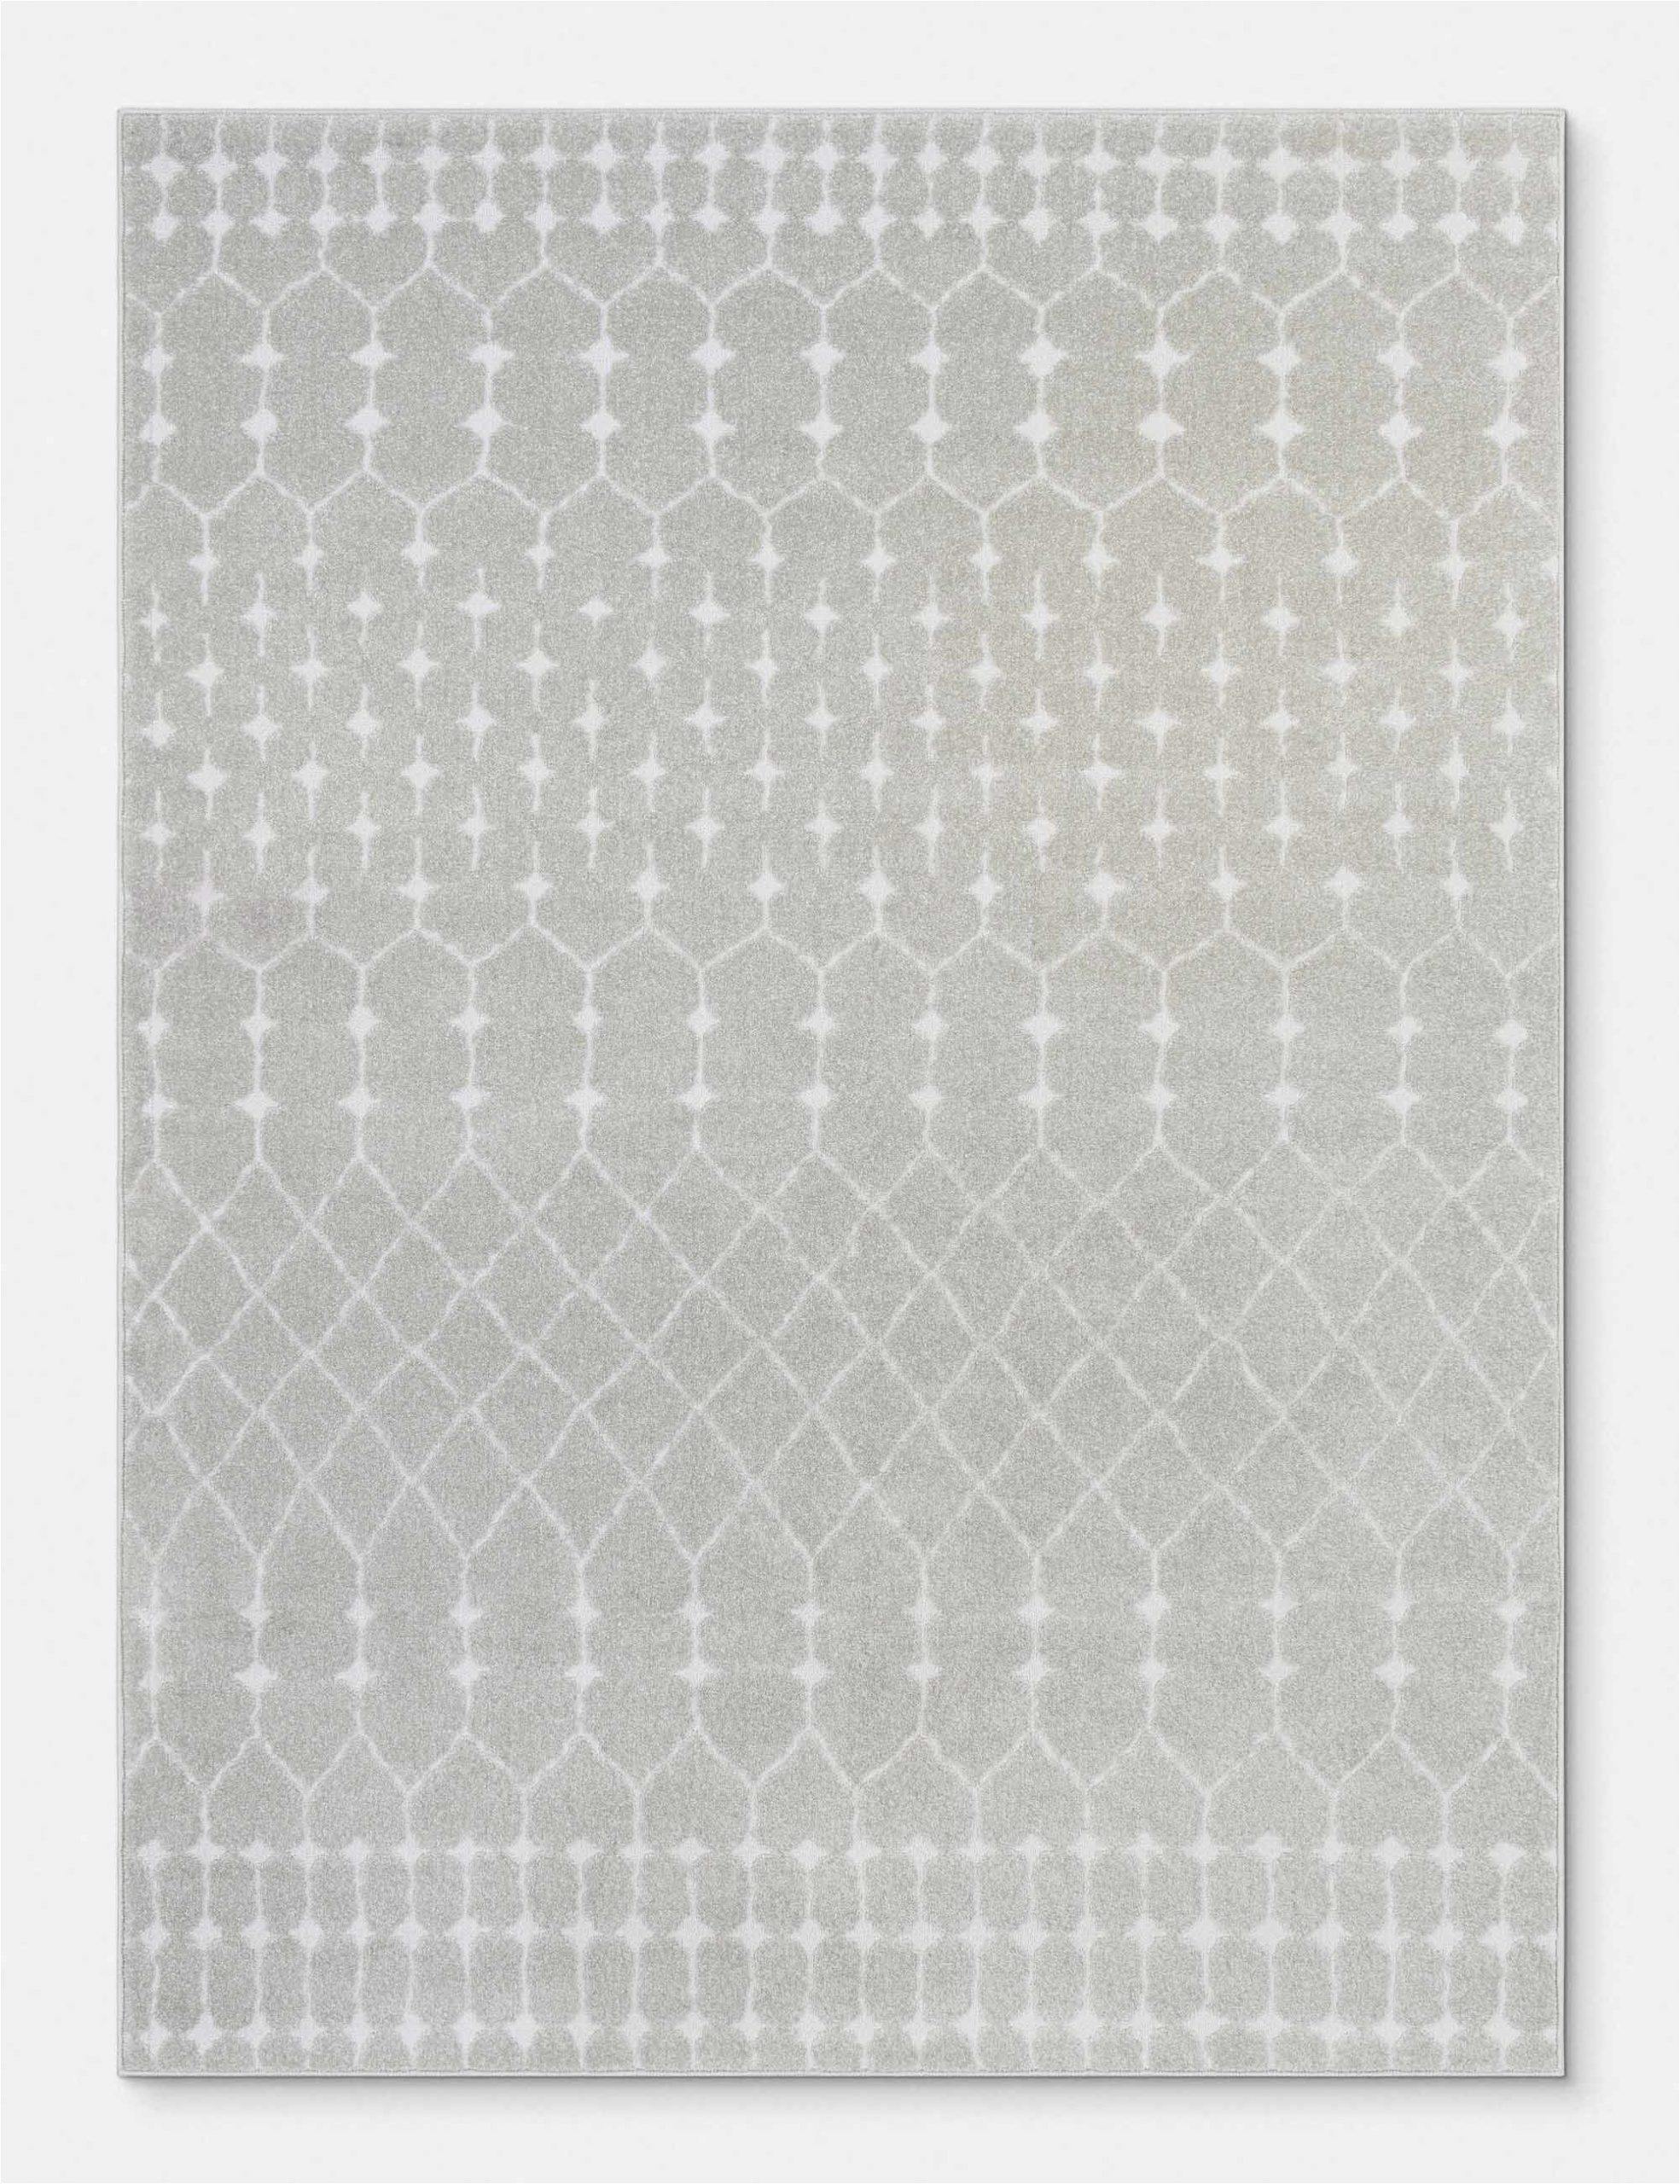 Low Pile White area Rug A High Low Pile and Two tone Palette Brings Dynamic Texture